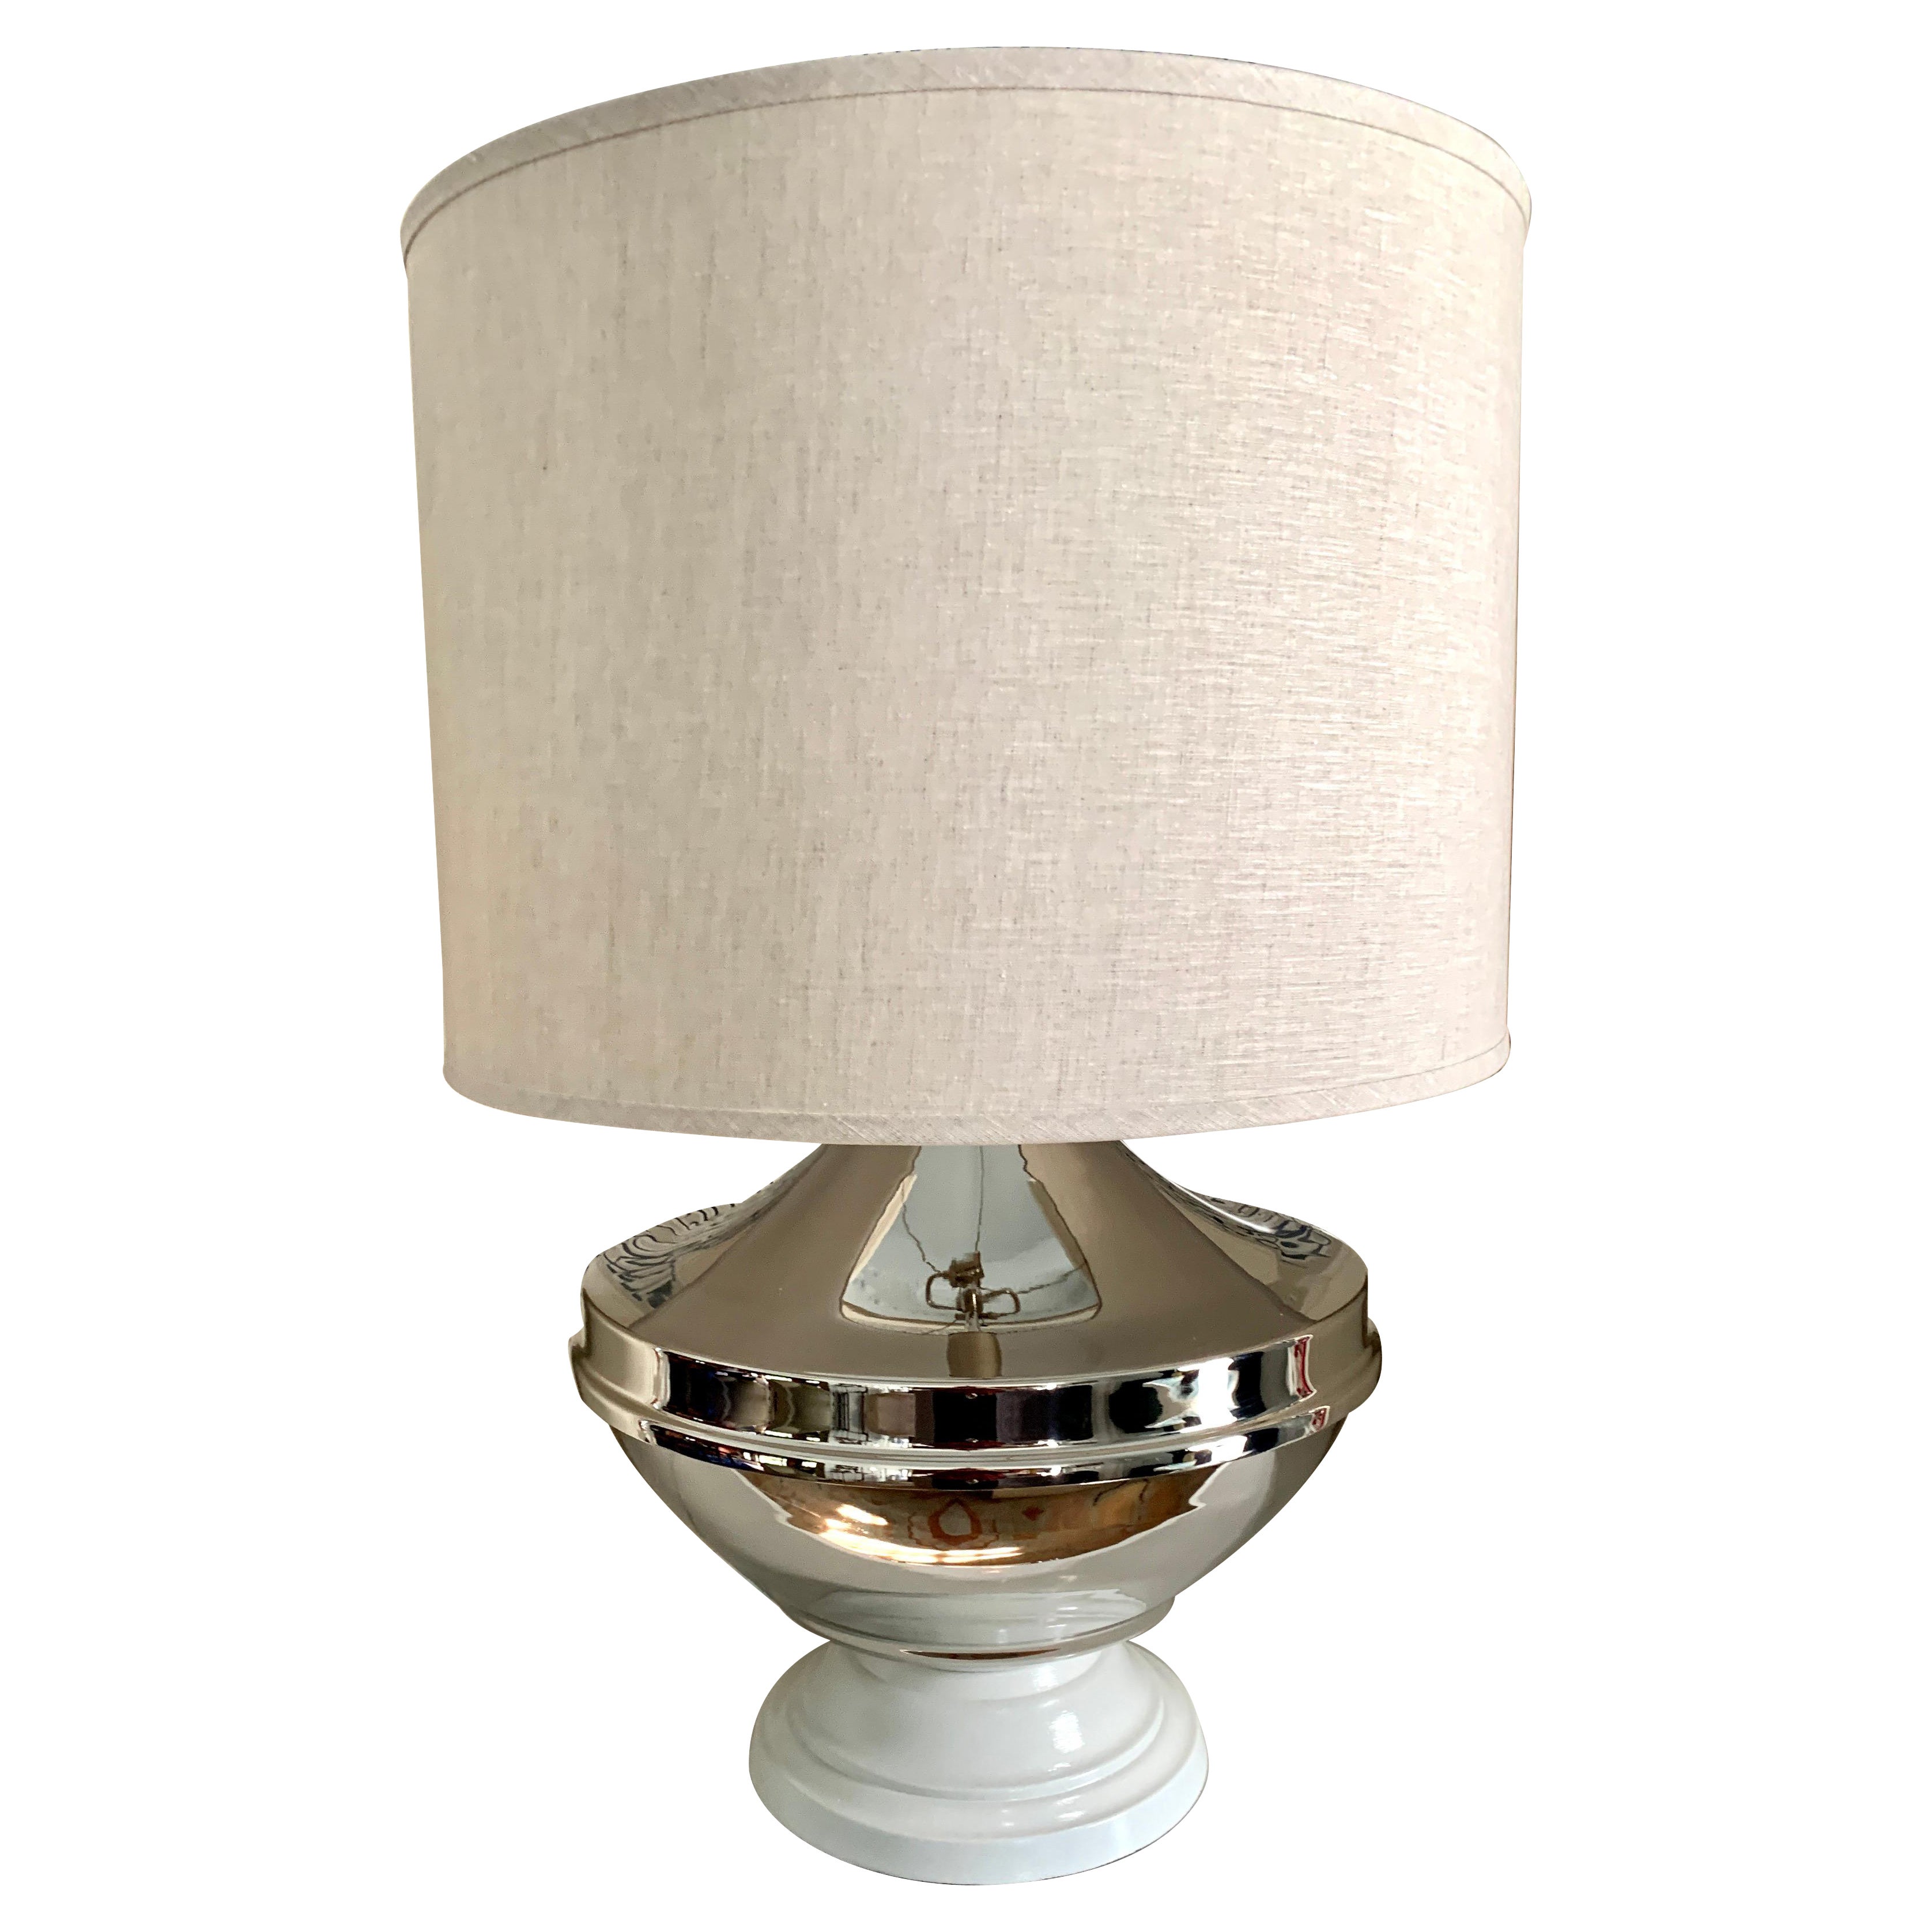 A restored mid century Chapman lamp with a large bulbous body of silver plate. The white base, and finial contrast nicely with the oatmeal linen shade. A wonderful piece for neutral interiors - the presence of this lamp is very large and is best